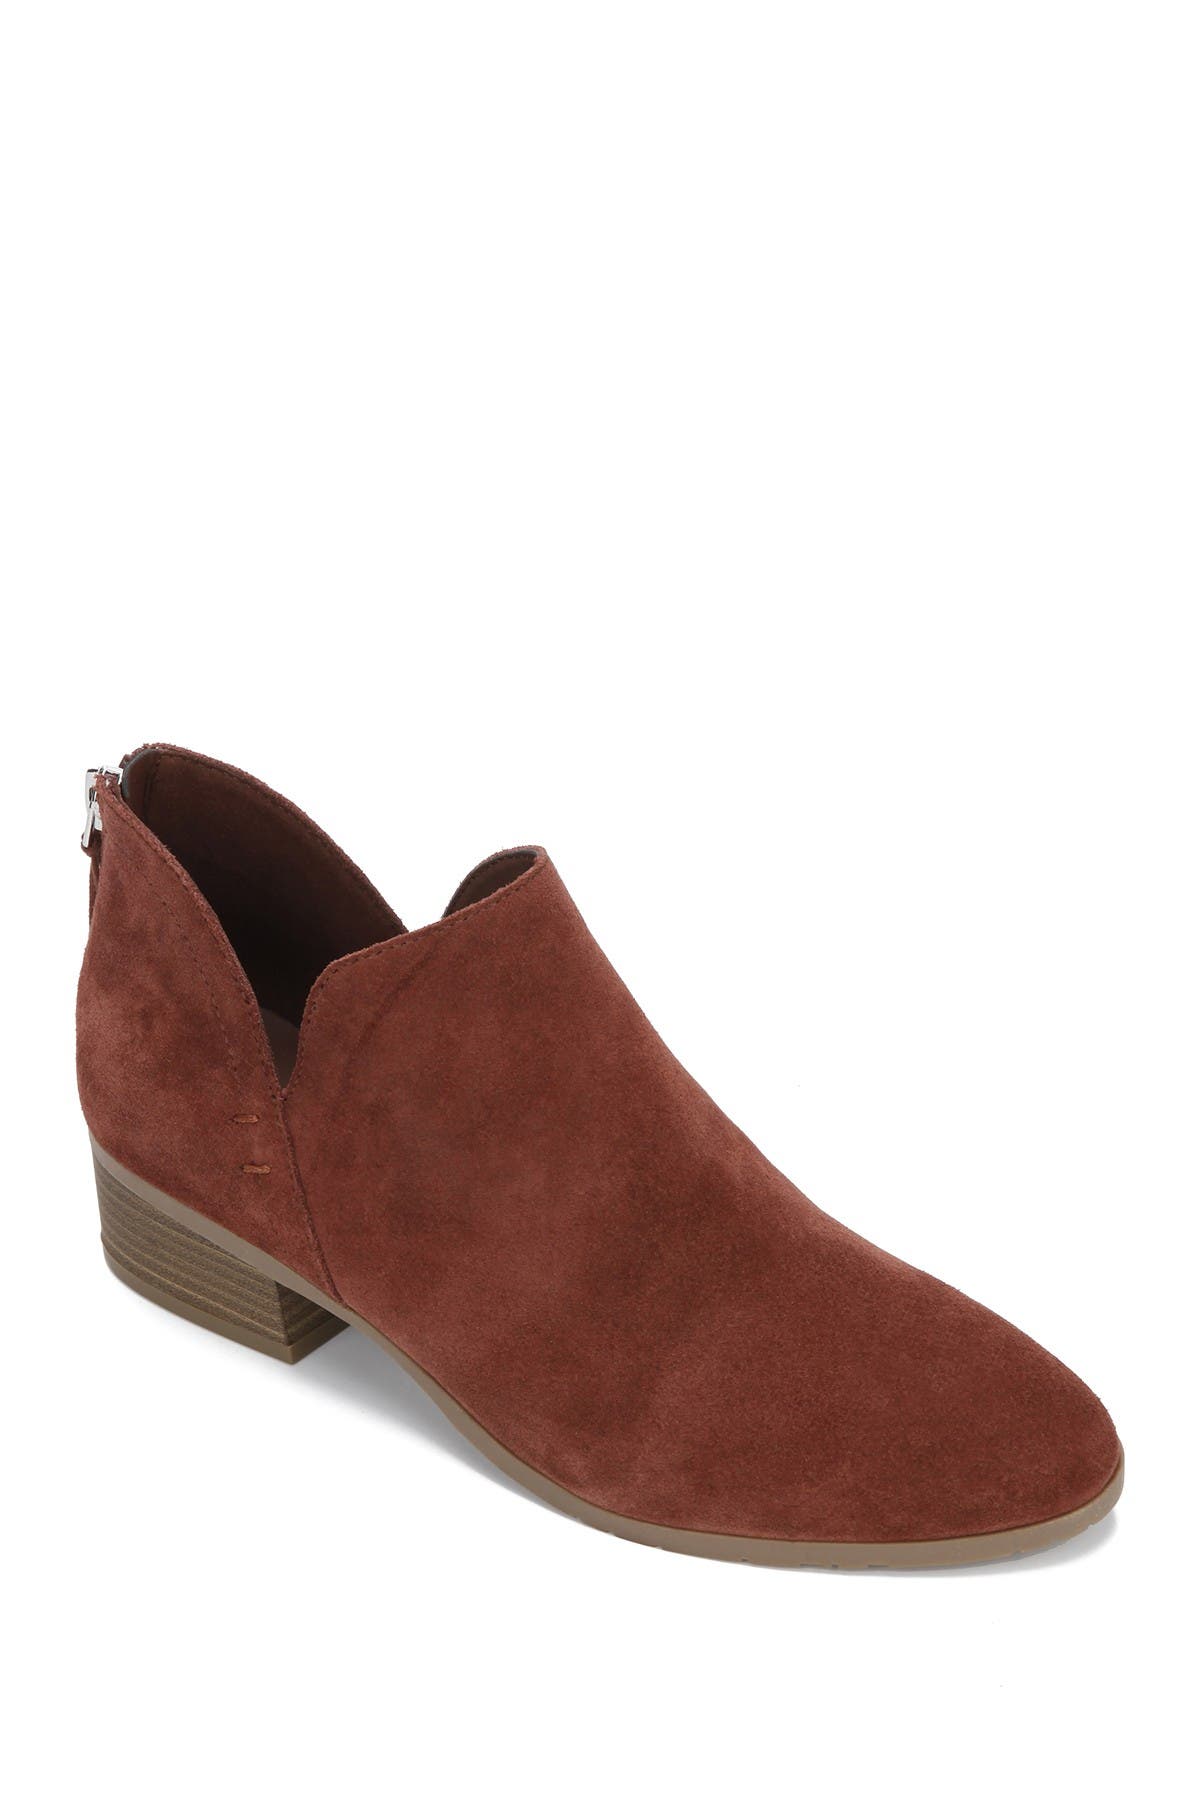 Kenneth Cole Reaction Side Skip Suede Ankle Boot In Rust/copper8